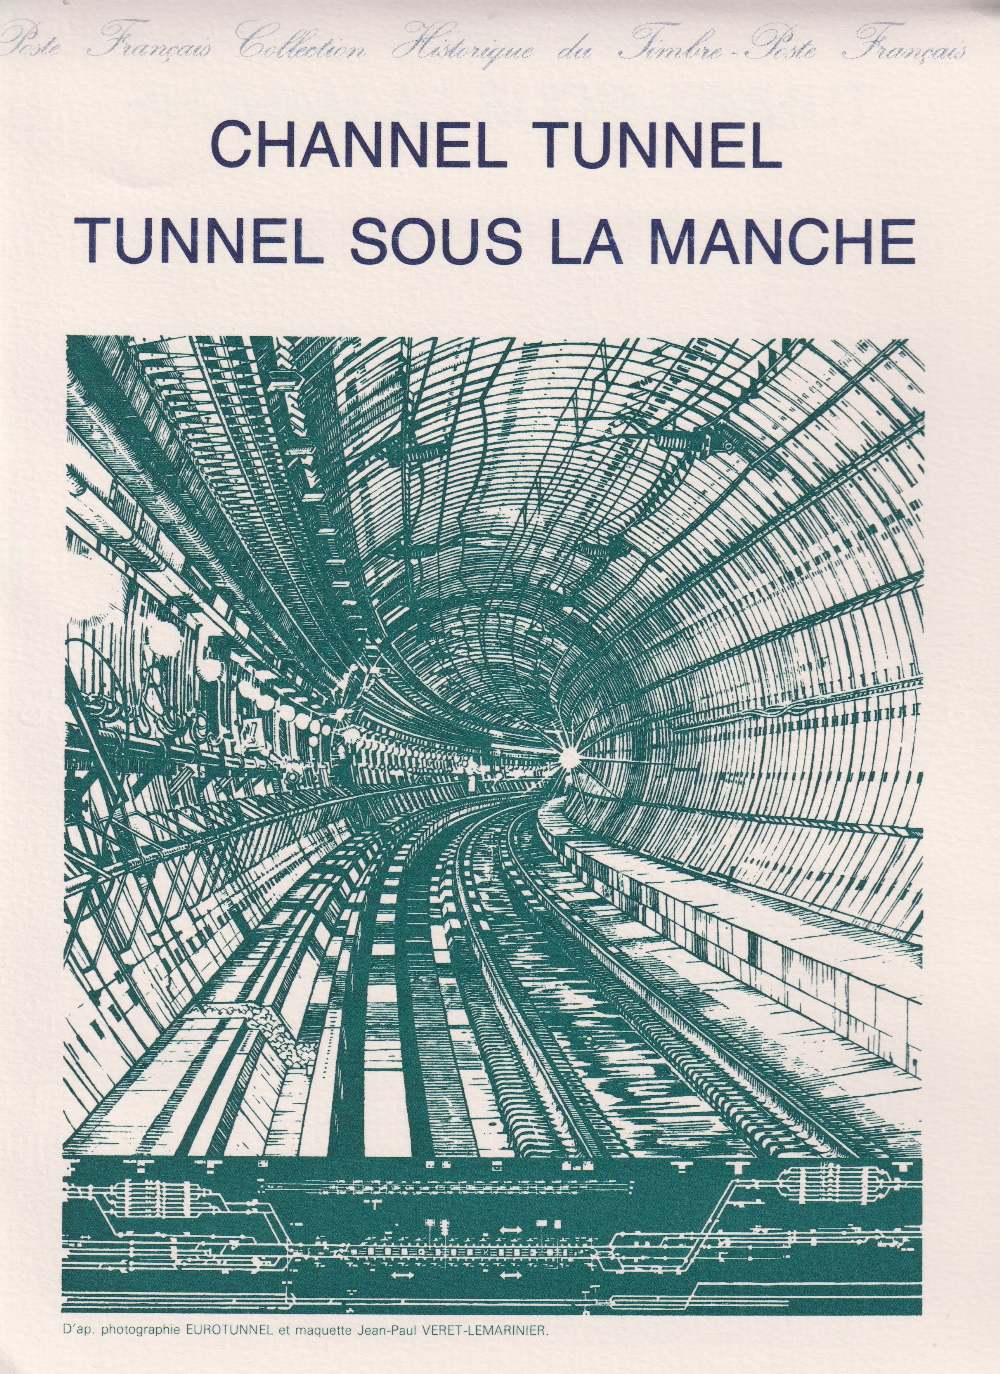 Stamps, 2 Channel Tunnel commemorative packs issued on 3 May 1994, containing UM sets of GB and